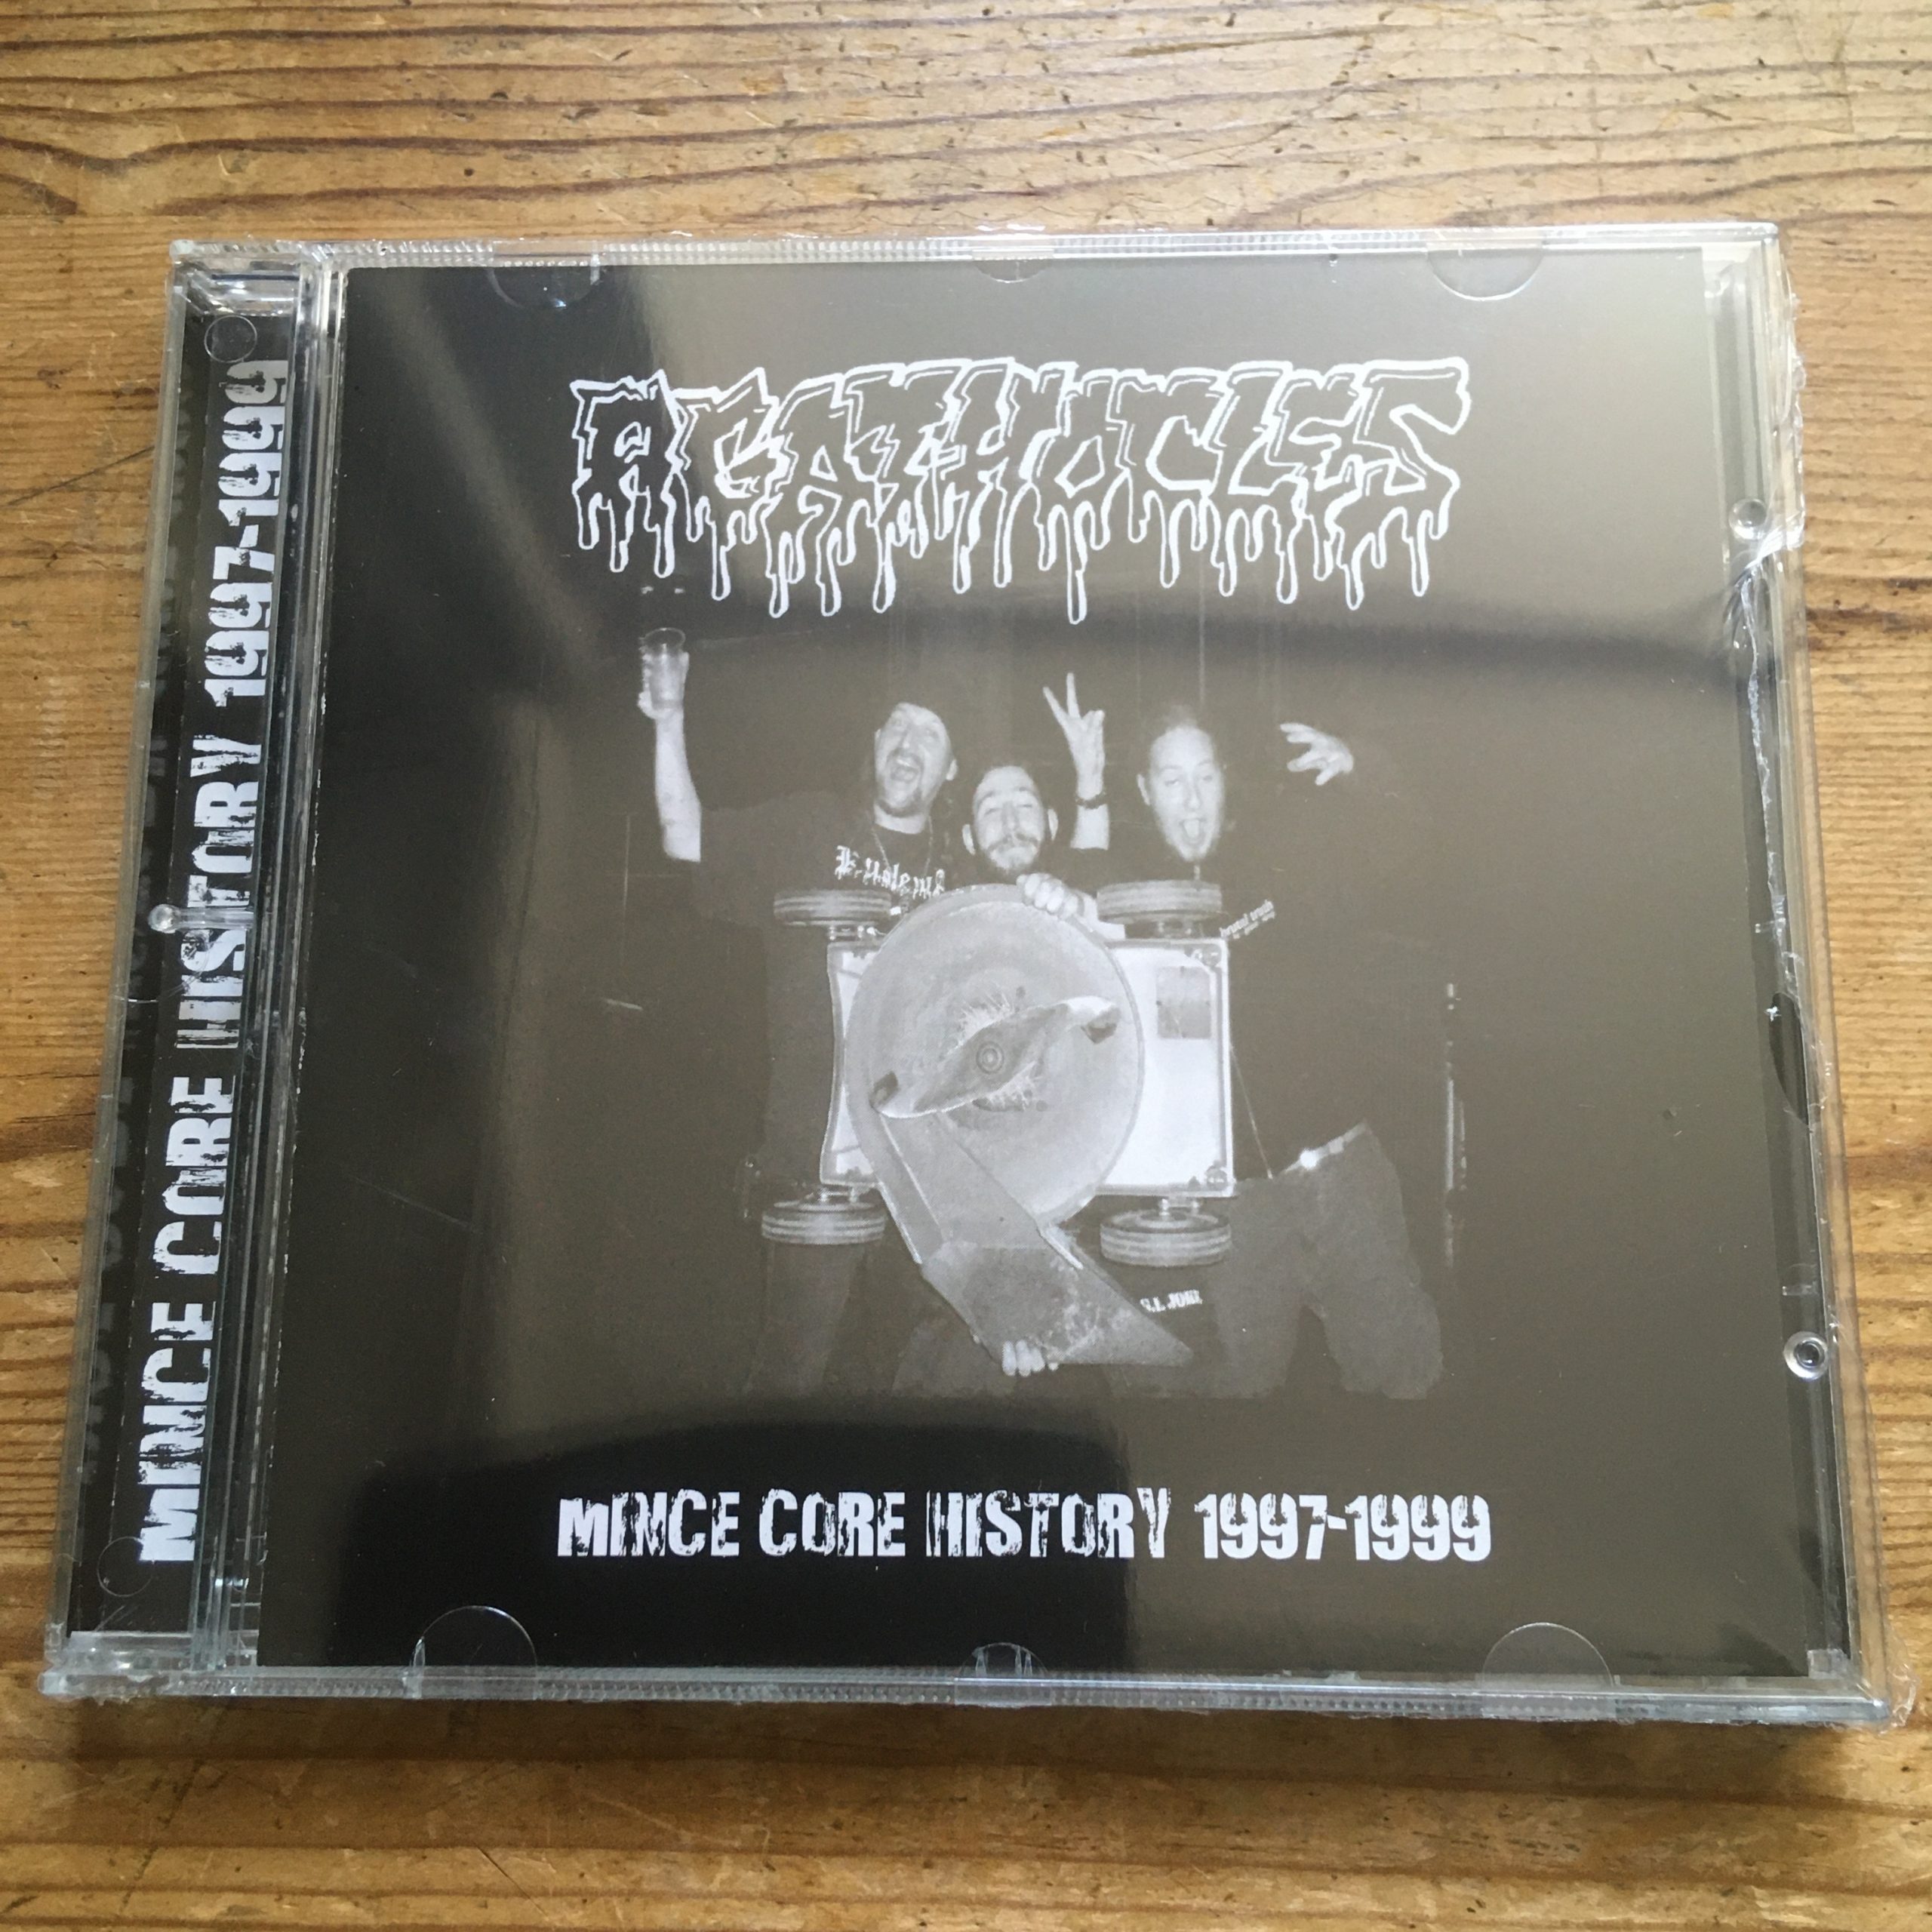 Photo of the Agathocles - "Mince Core History 1997-1999" CD